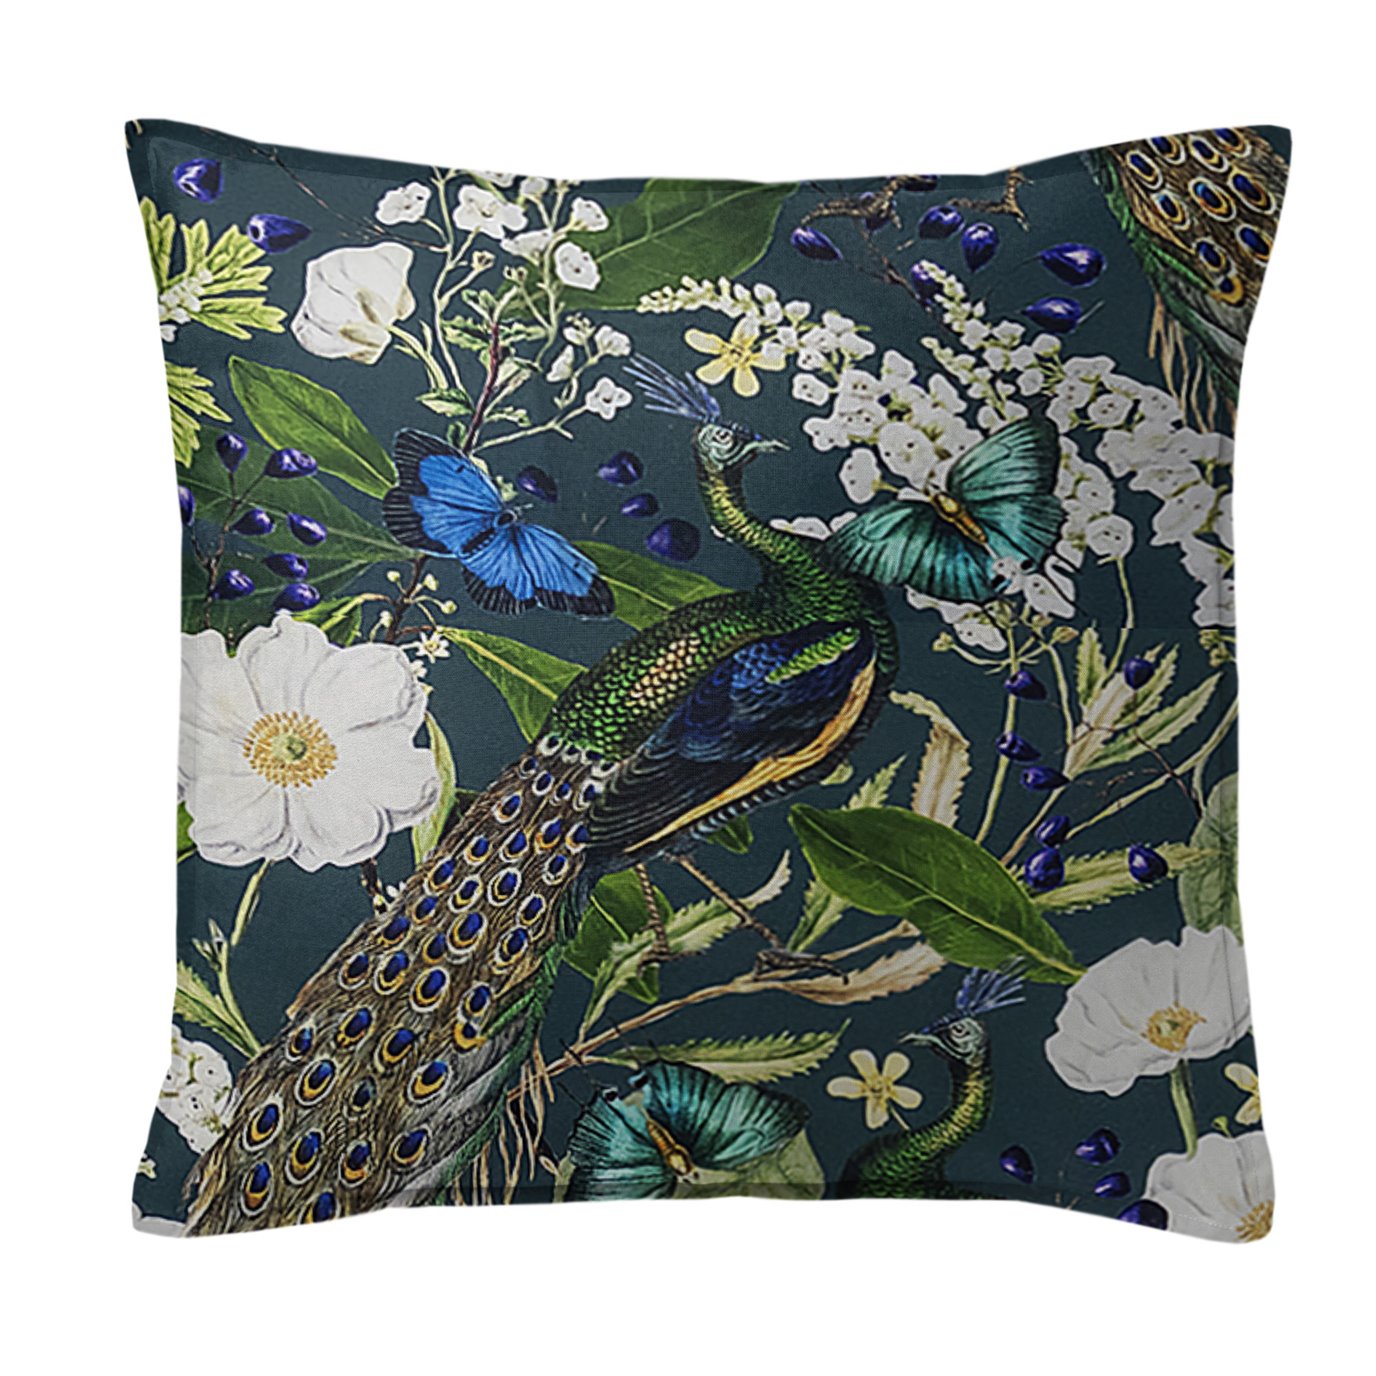 Peacock Print Teal/Navy Decorative Pillow - Size 24" Square